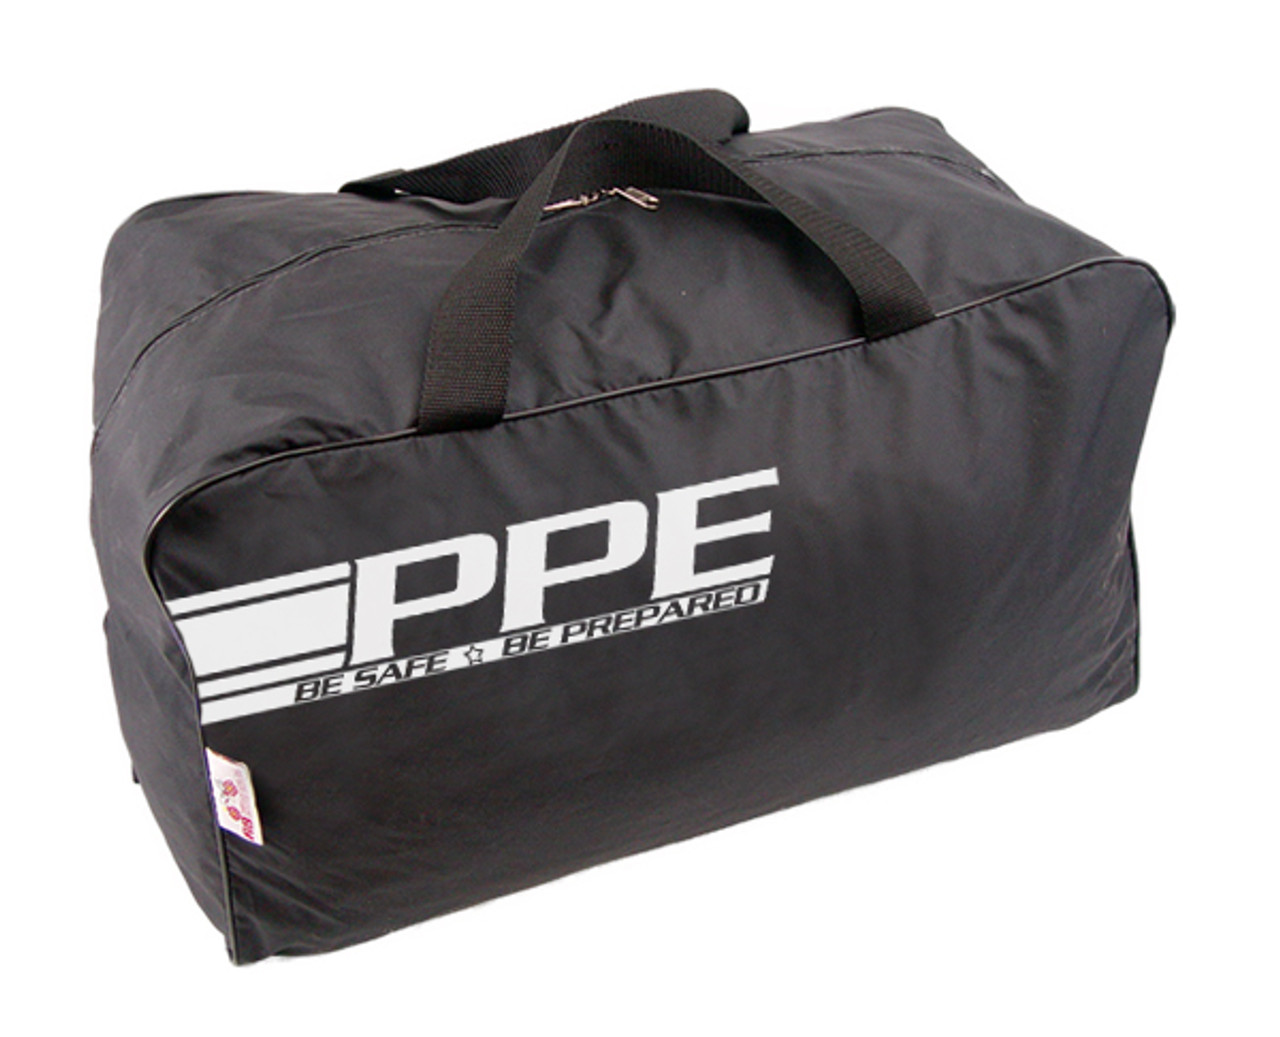 PPE Duffel Large with PPE Logo